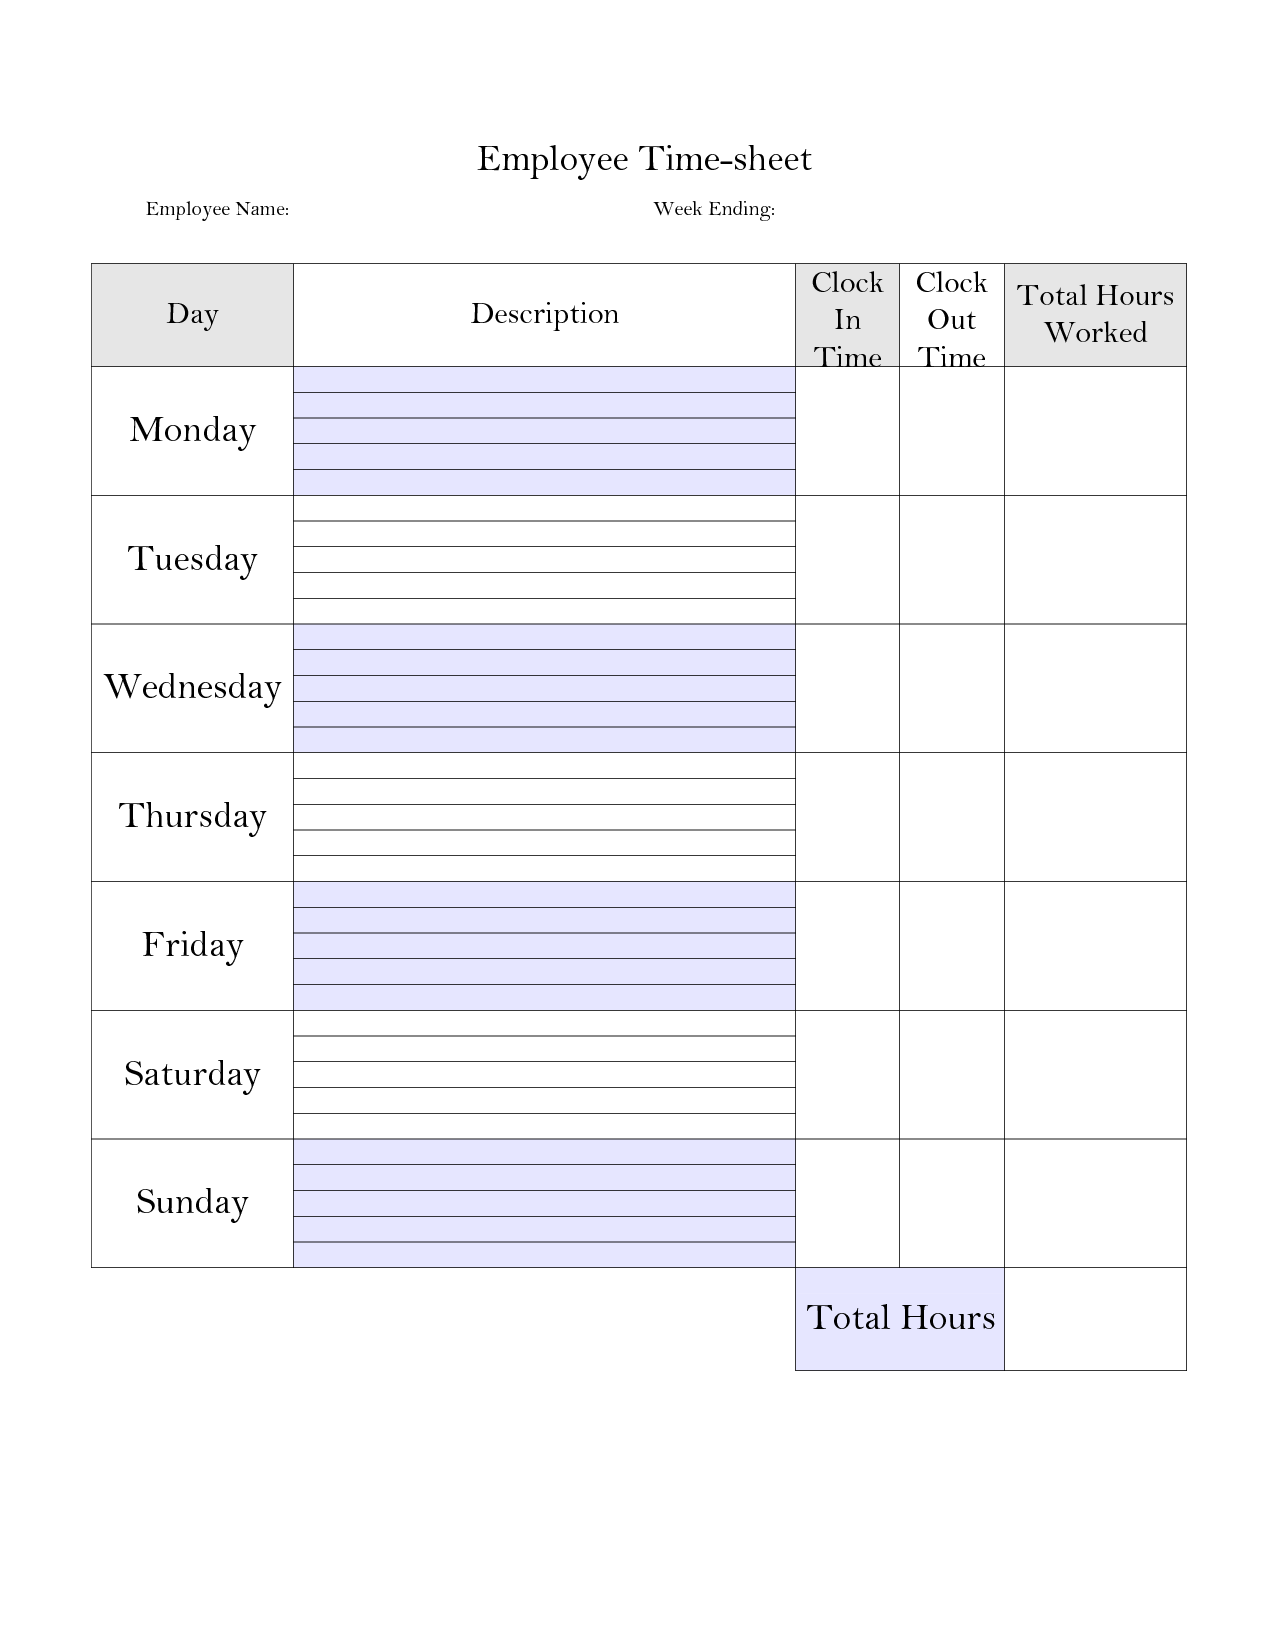 5 Best Images of Printable Employee Time Card Template Free Printable